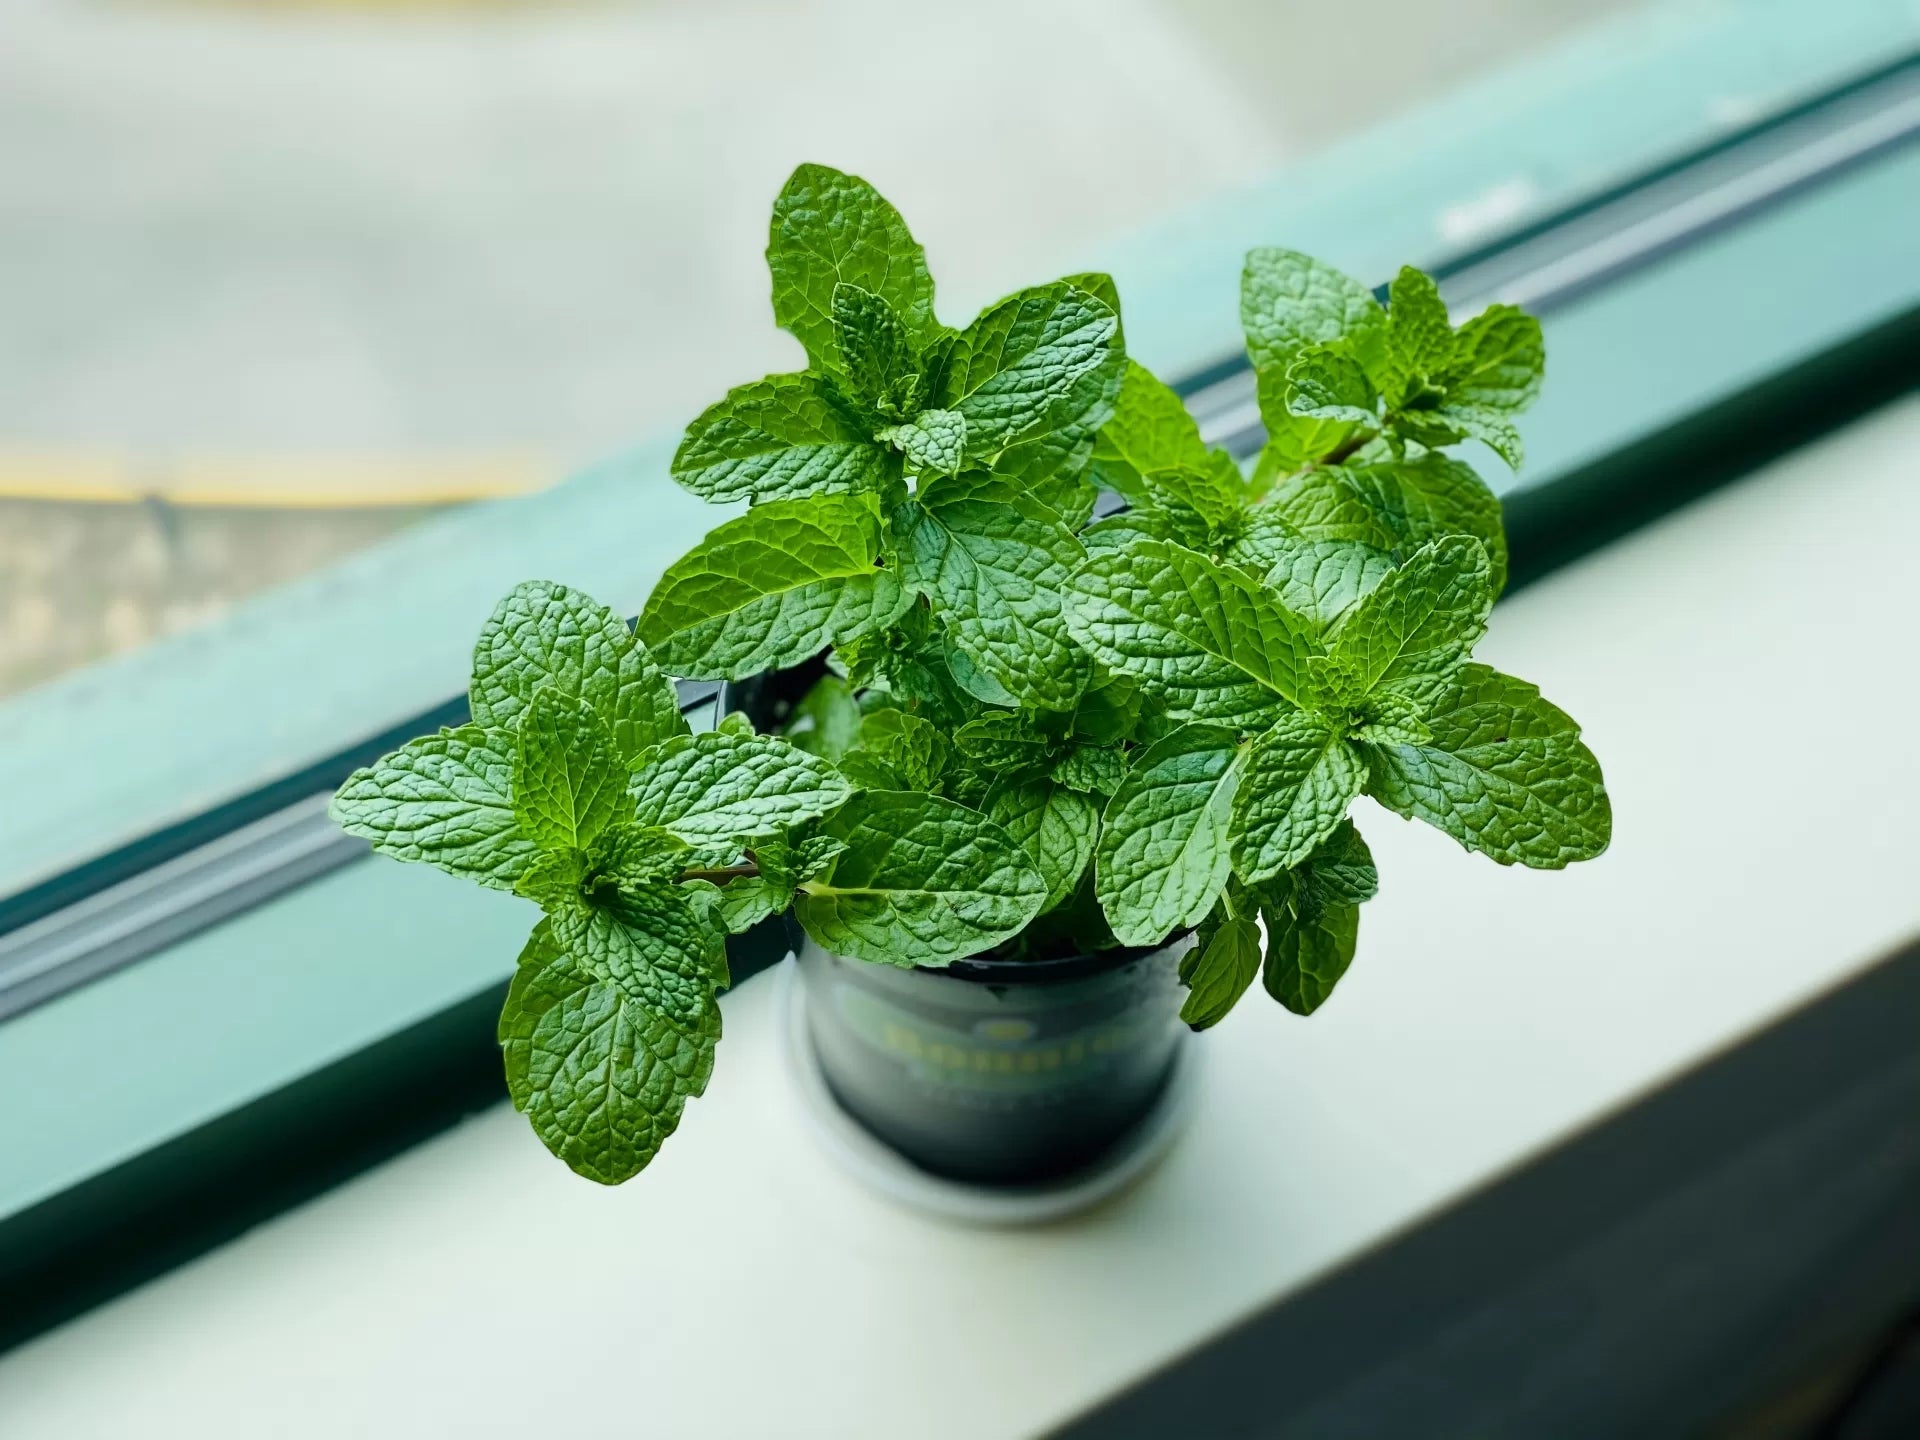 A green mint plant that produces the terpene Ocimene sits on the window sill bathed in sunlight